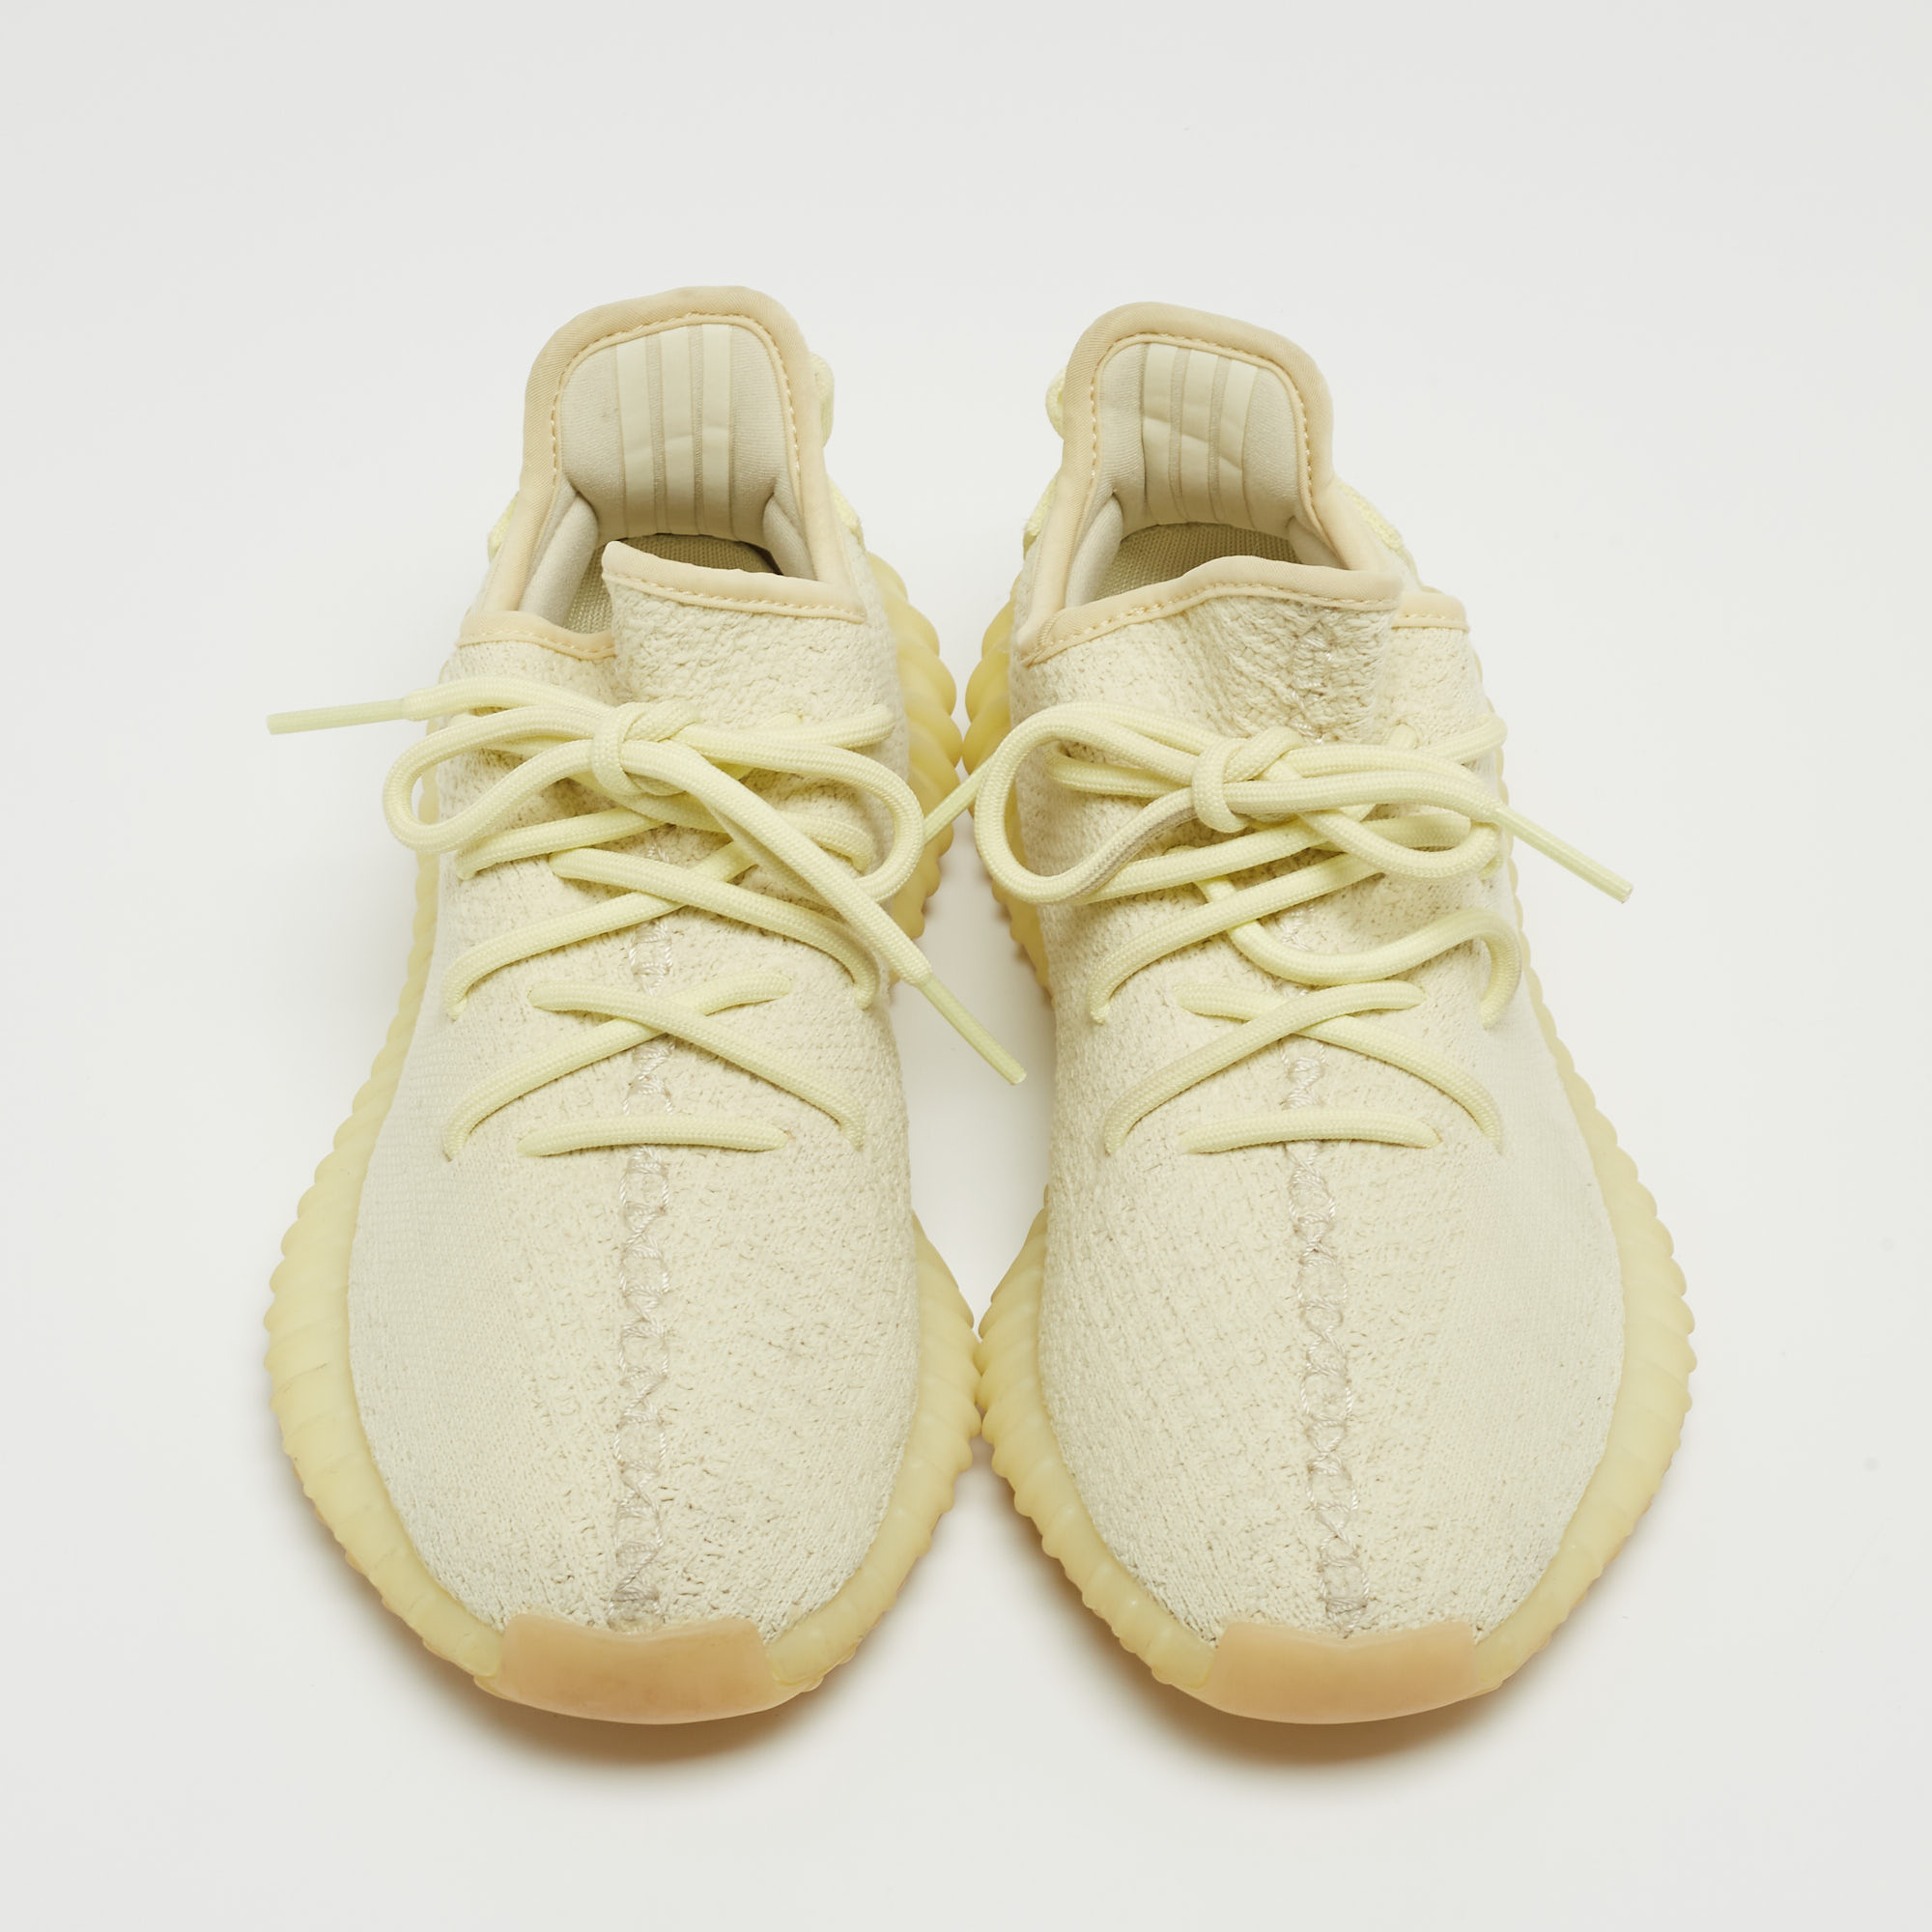 Yeezy X Adidas Light Yellow Knit Fabric Boost 350 V2 Butter Sneakers Size 39 1/3